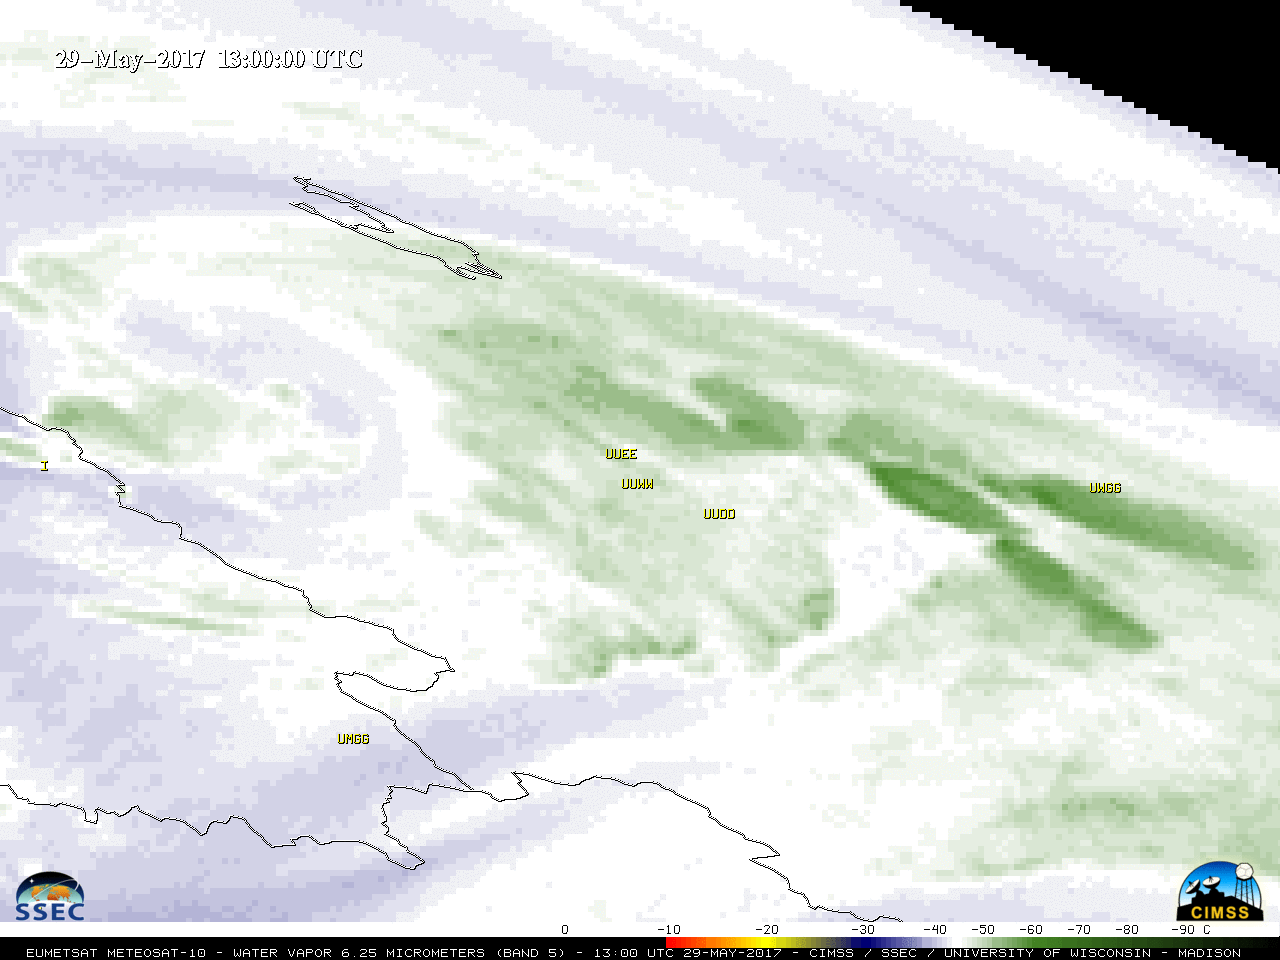 Meteosat-10 Water Vapor (6.25 µm) images [click to play animation]